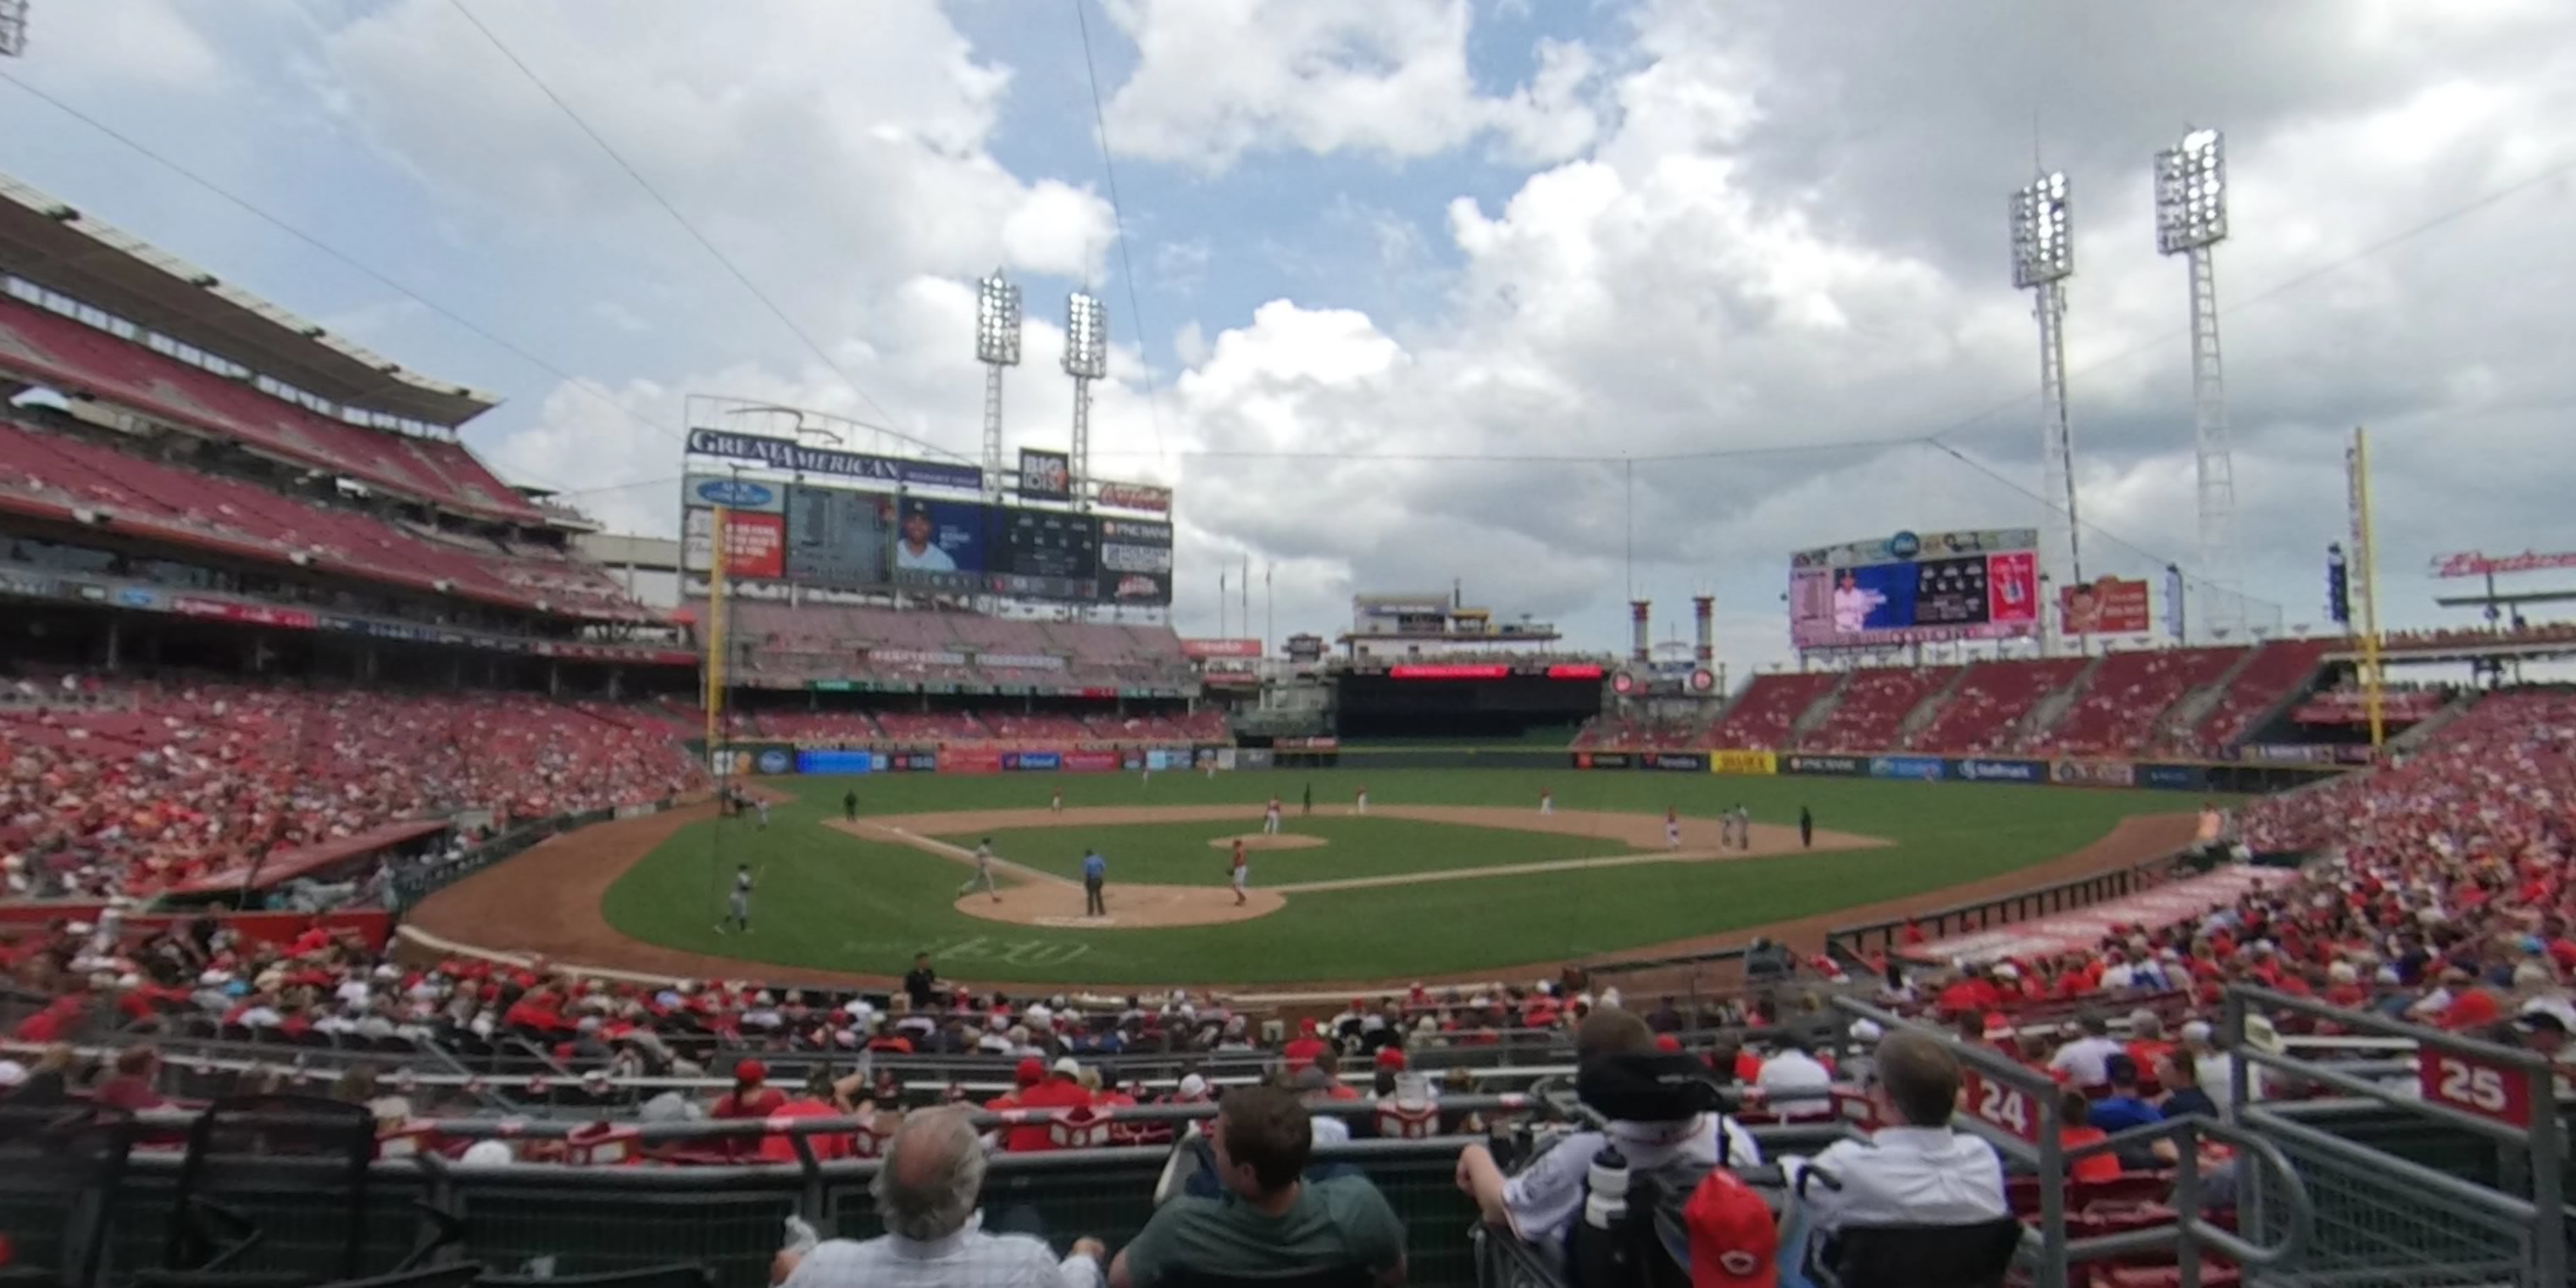 section 124 panoramic seat view  for baseball - great american ball park